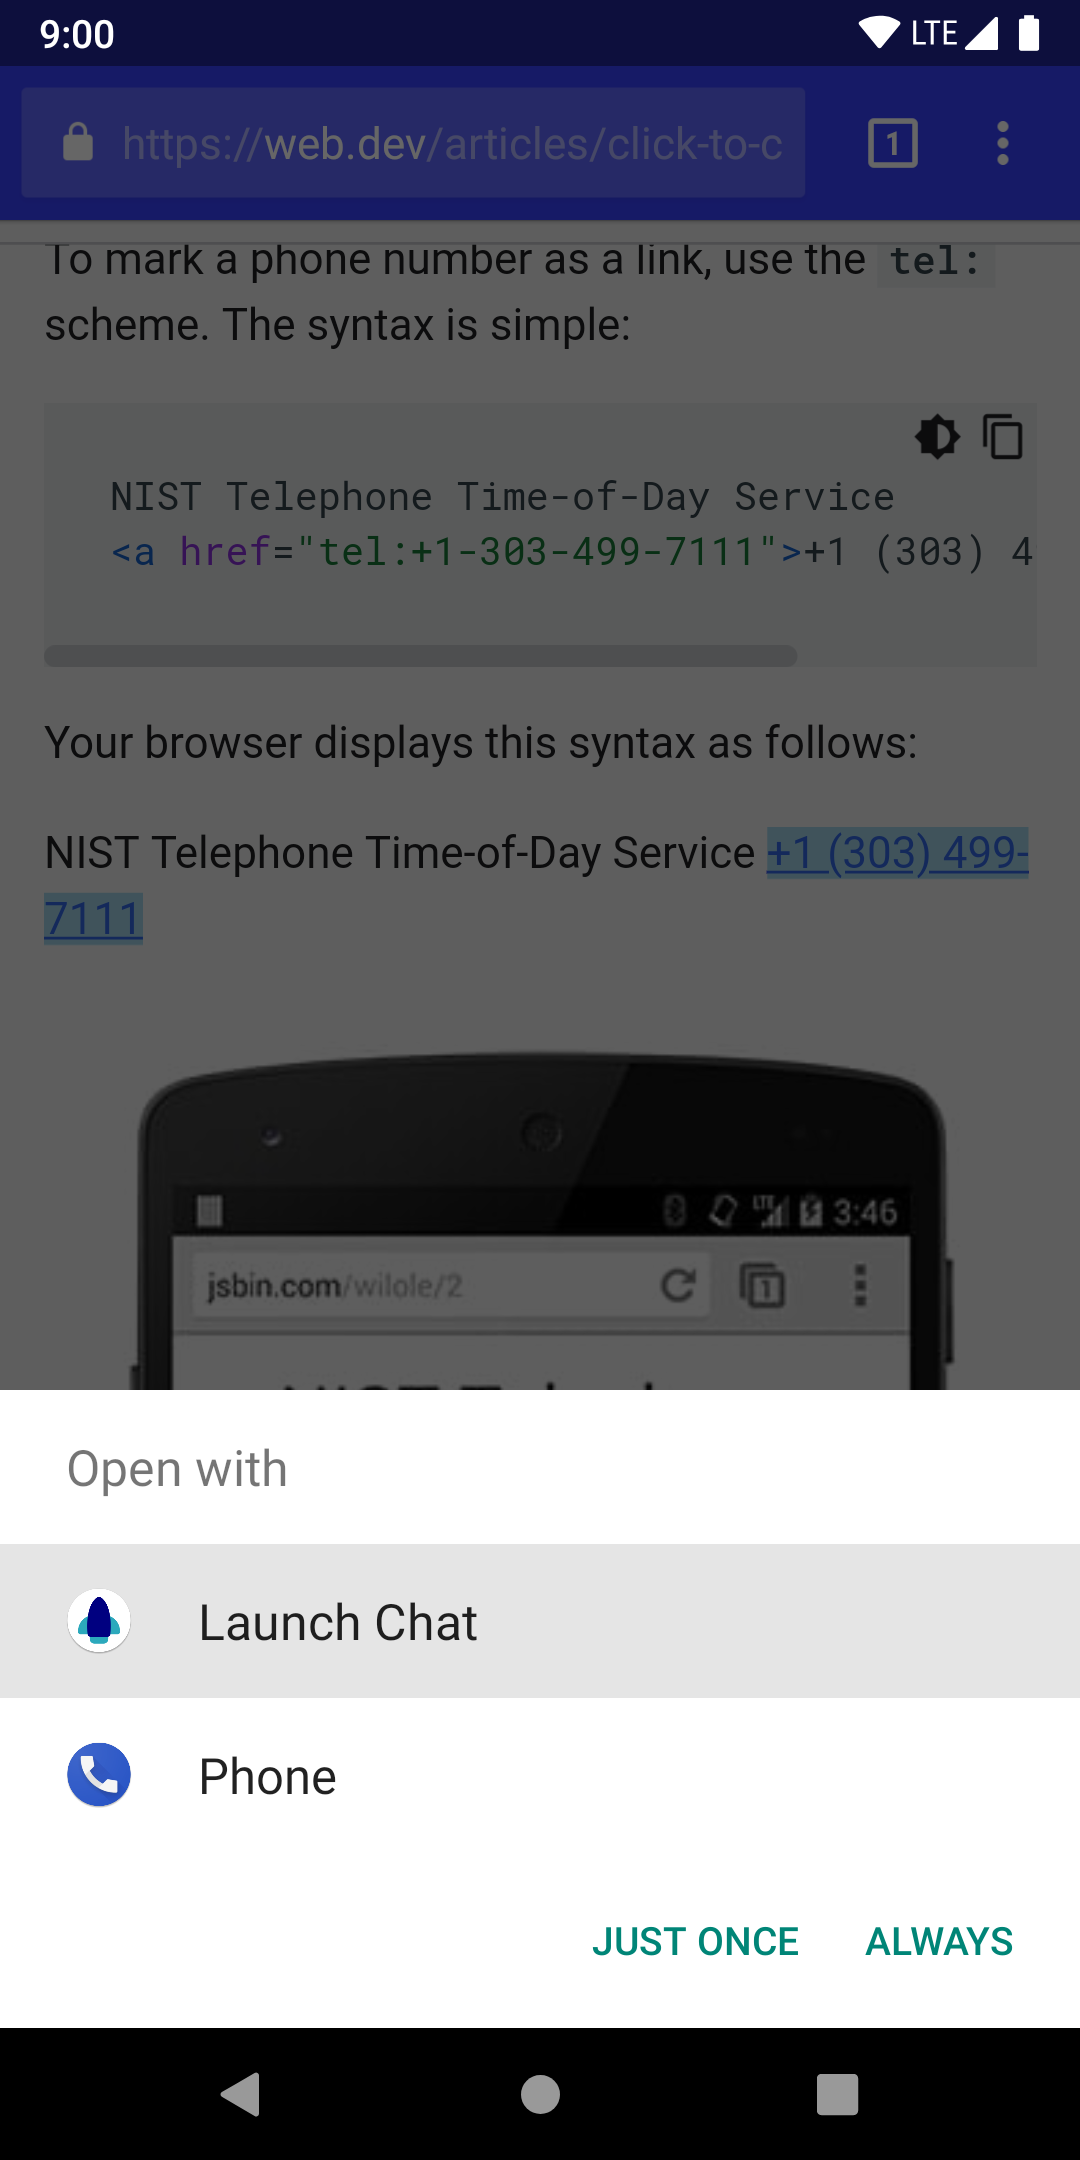 A screenshot demonstrating the use of the app from a browser app when a phone number is clicked